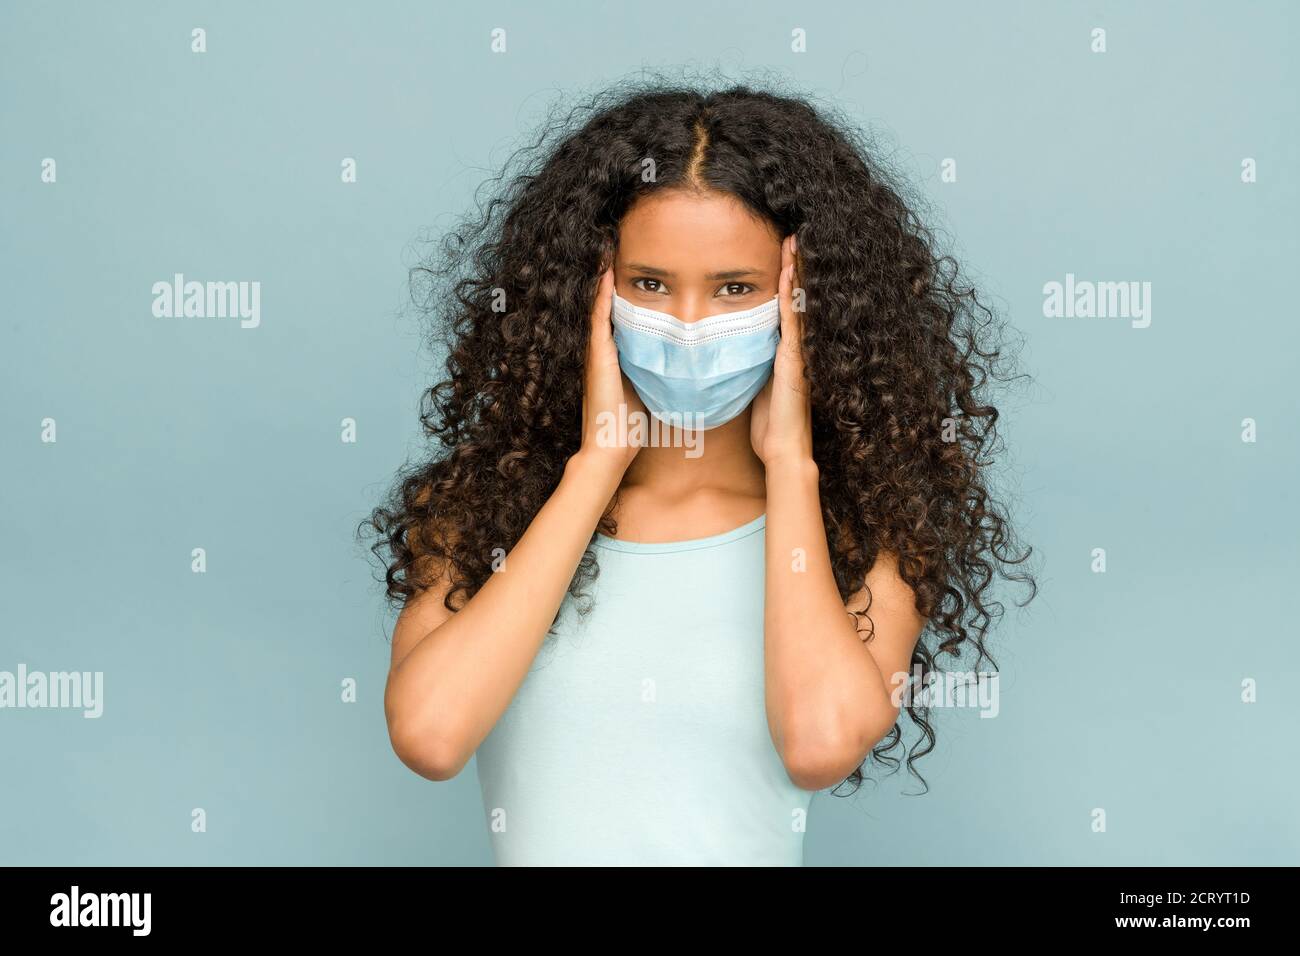 Attractive young Dominican woman with long curly hair wearing a face mask during the coronavirus or Covid-19 pandemic in a concept of the New Normal l Stock Photo